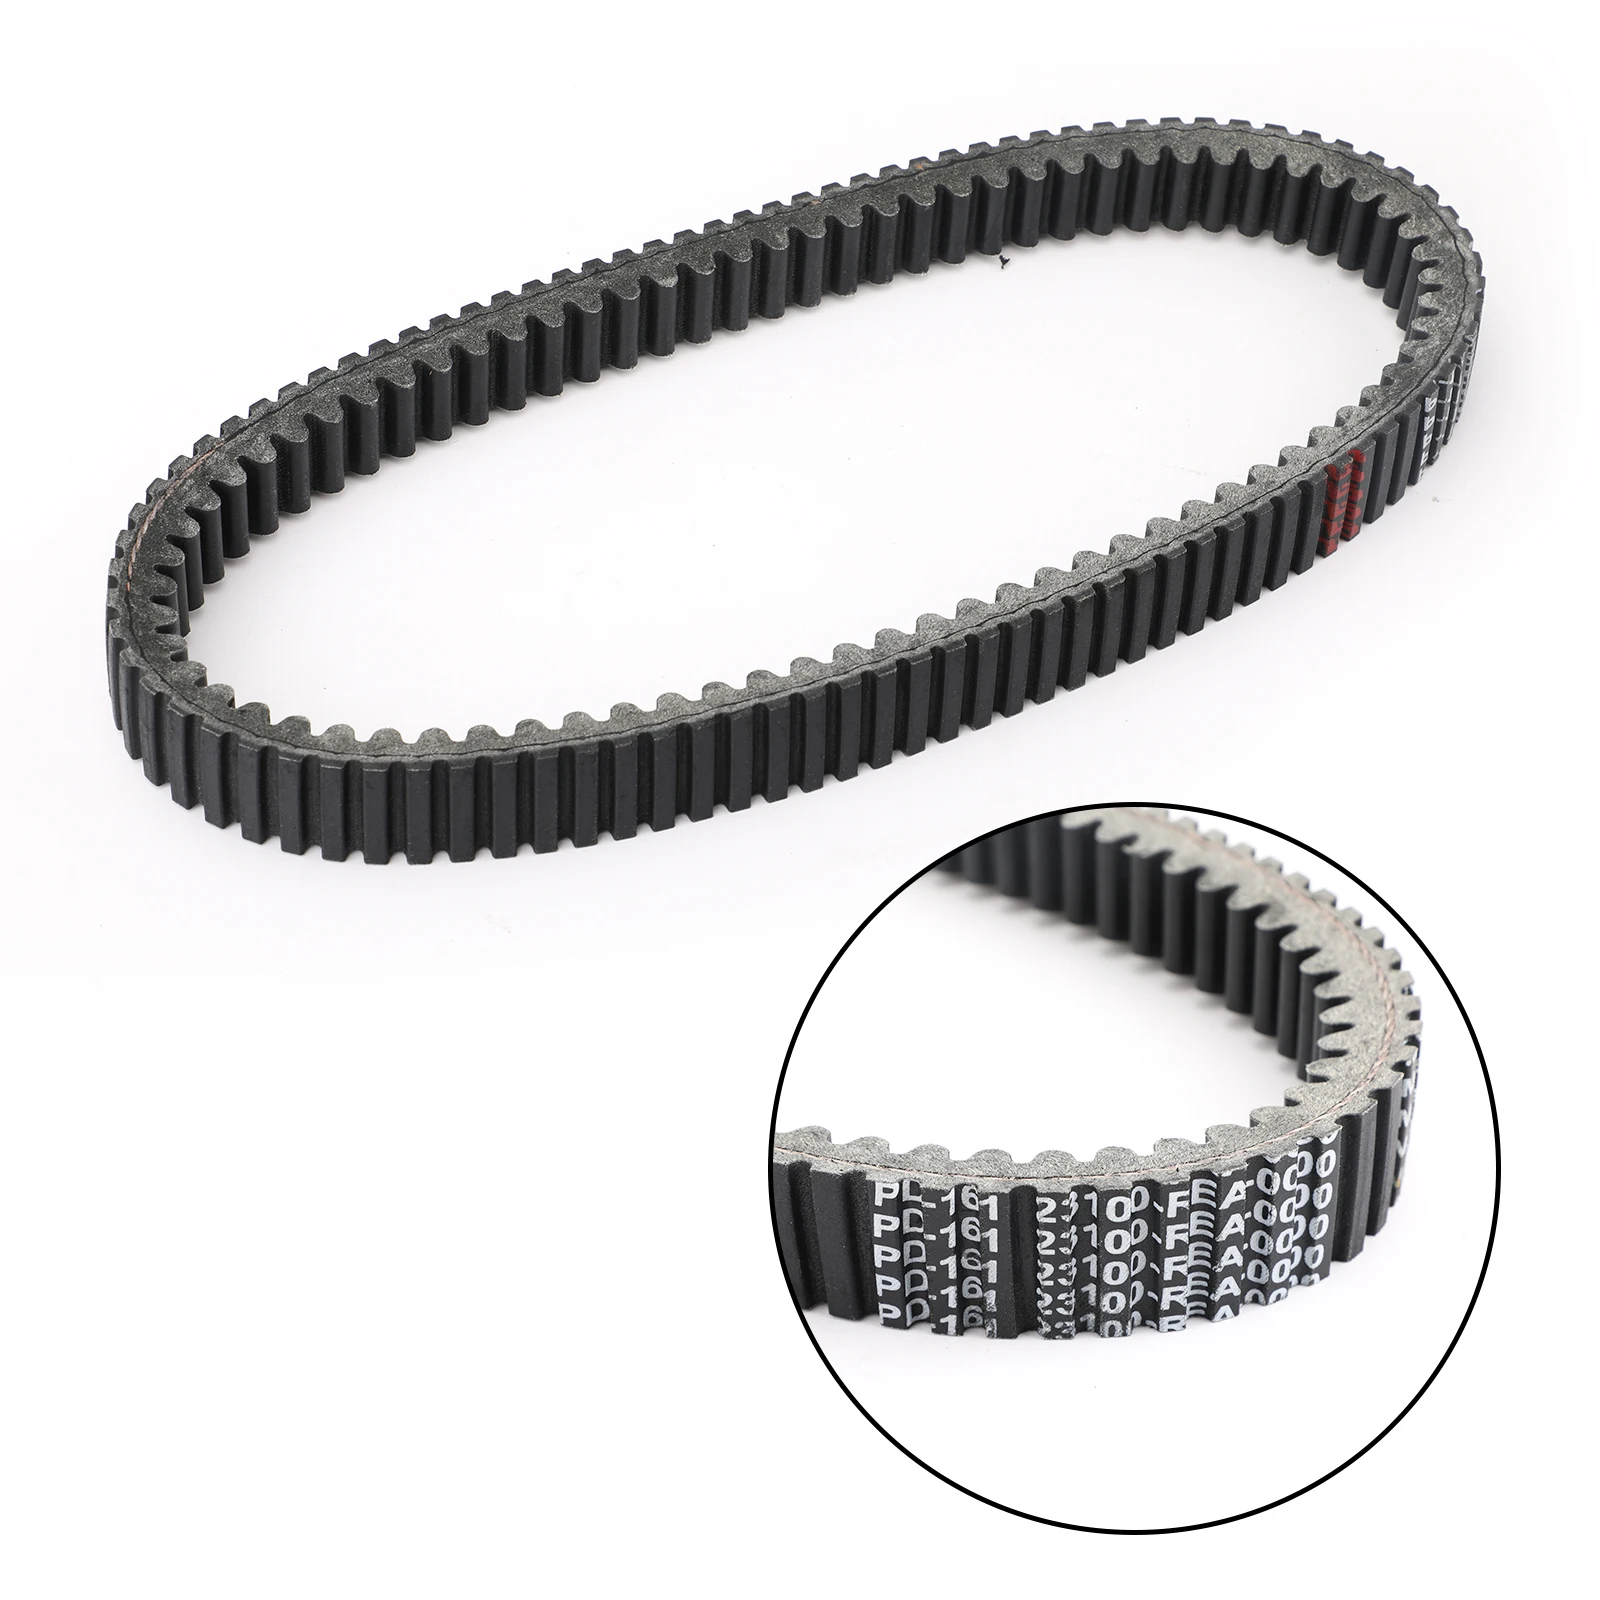 

Topteng Motorcycle Drive Belt 915OC x 30W For SYM Quad Raider 600 ATV 2015-2017 P/N.23100-REA-0000 motorcycle accessorie